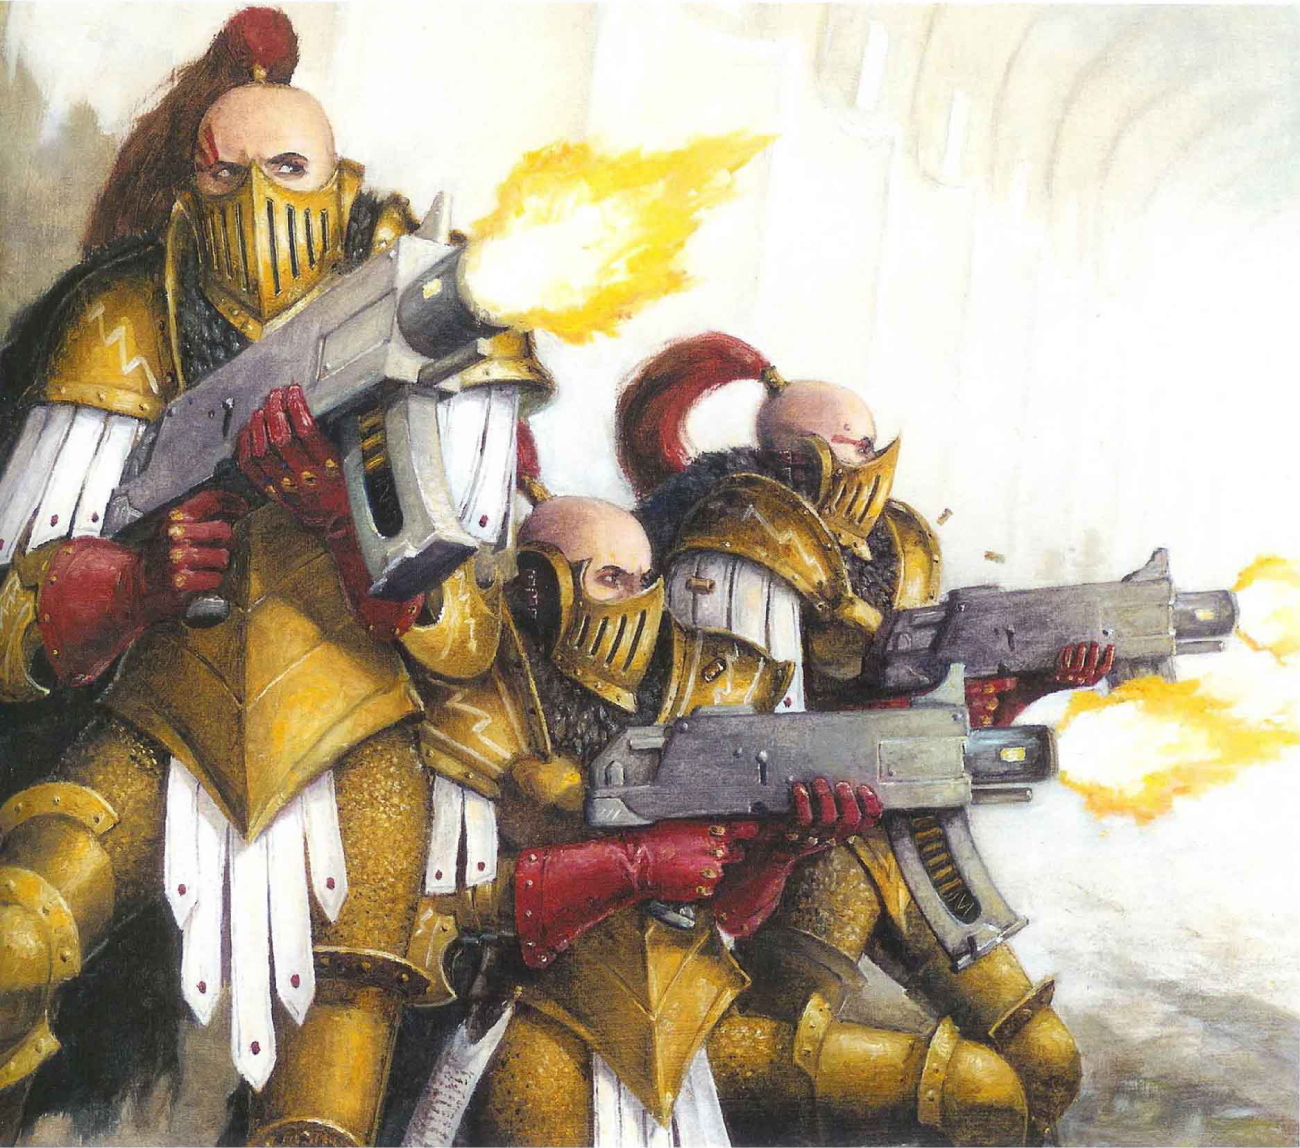 Sisters of Silence - Sisters of Silence, Wh Art, Wh back, Warhammer 40k, Longpost